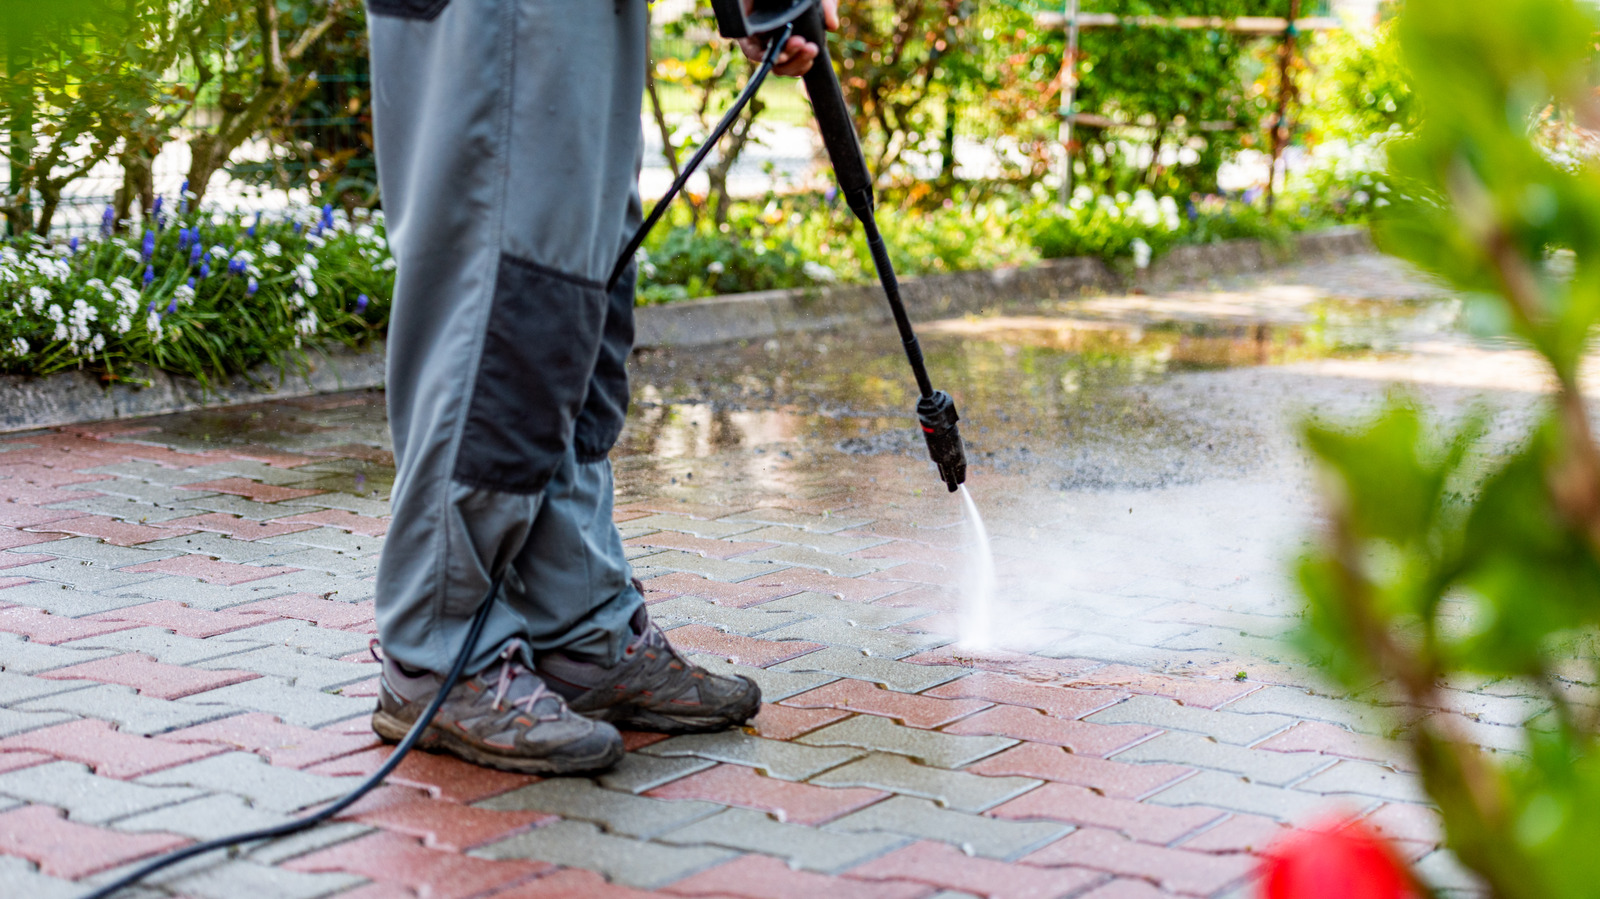 New Ryobi Wire Brush Patio Cleaner Tool is the reason why SO MANY are  investing in Ryobi Tools 